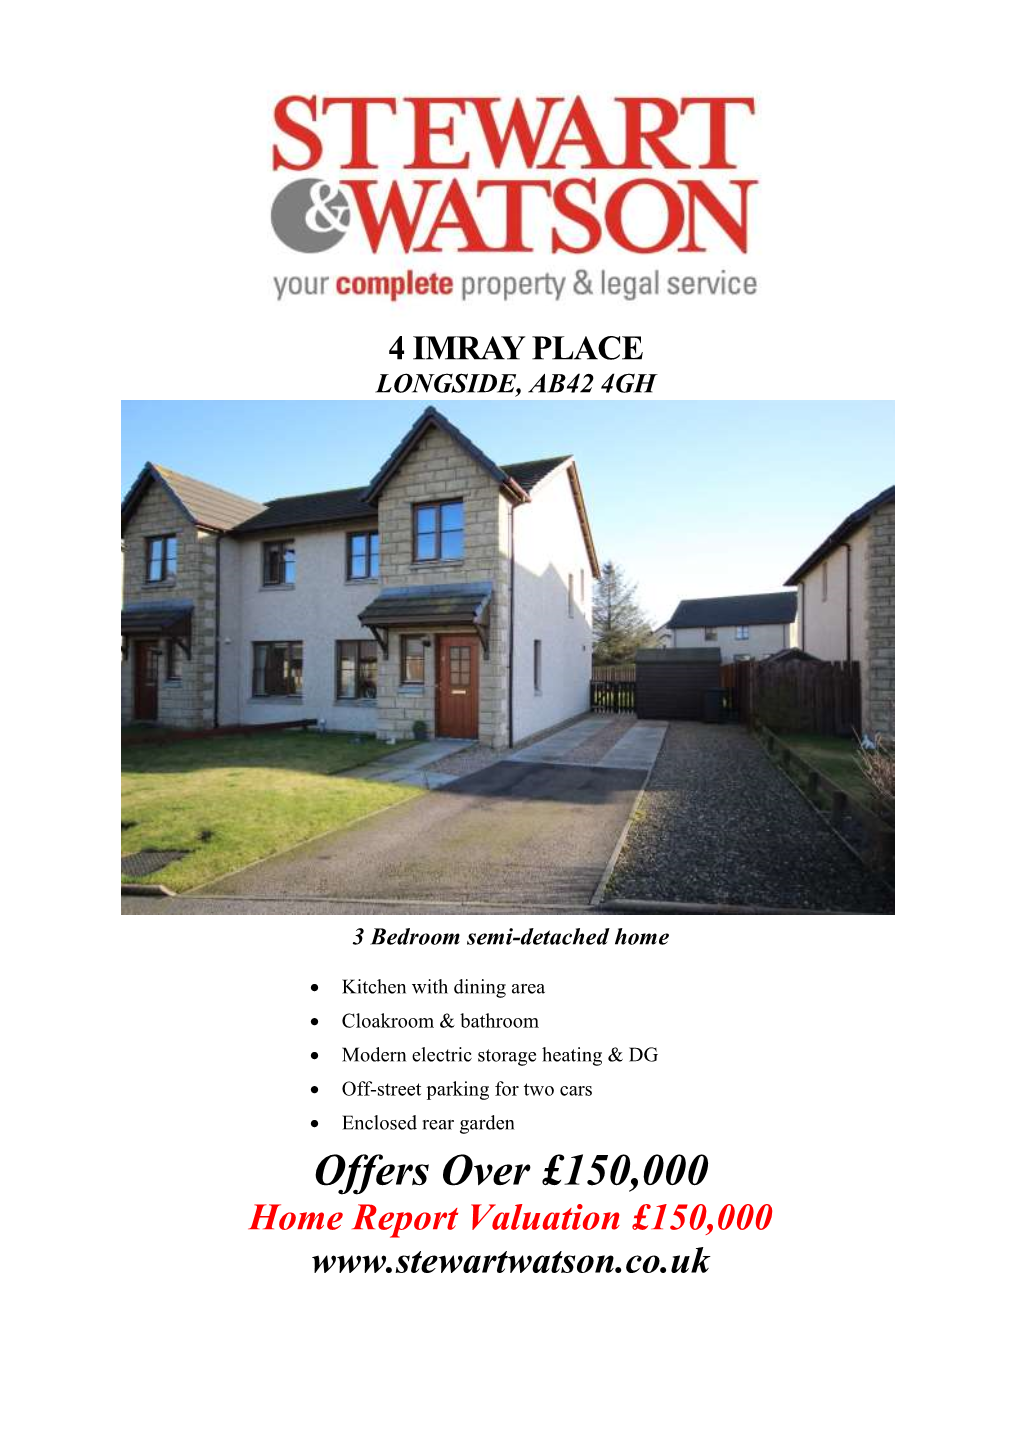 Offers Over £150,000 Home Report Valuation £150,000